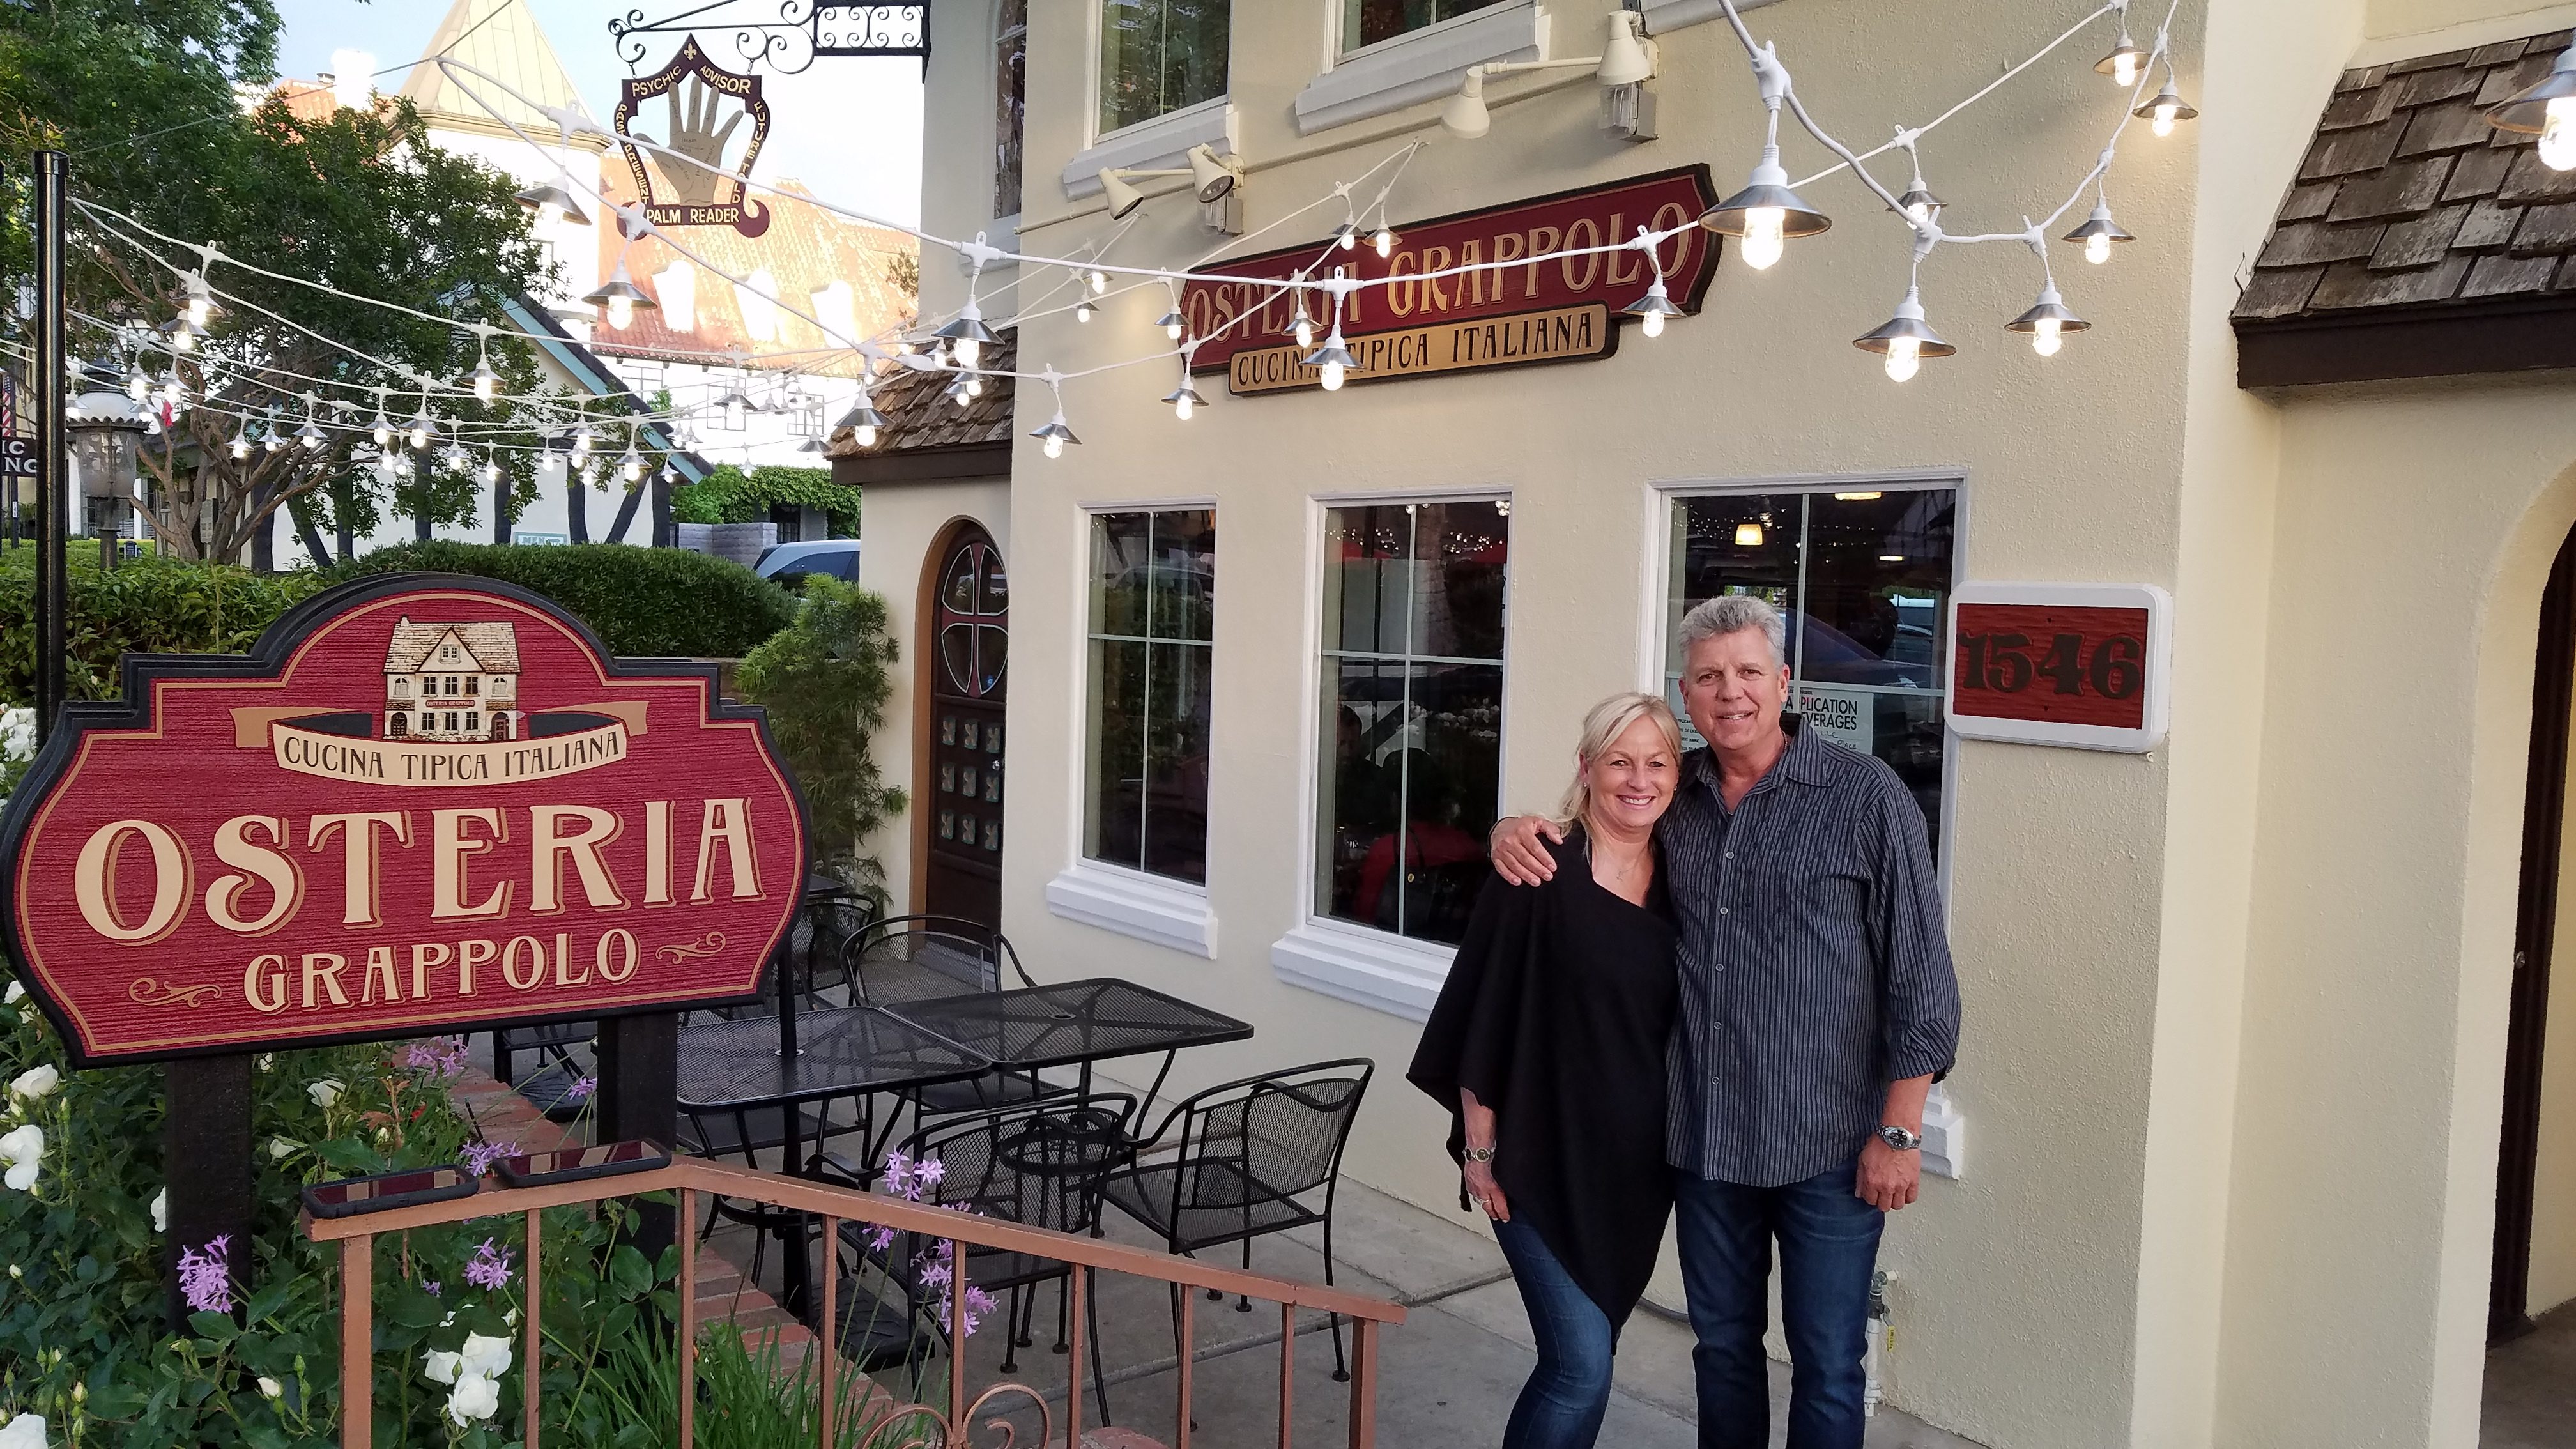 Osteria Grappolo serving ‘northern Italian’ dishes in Solvang